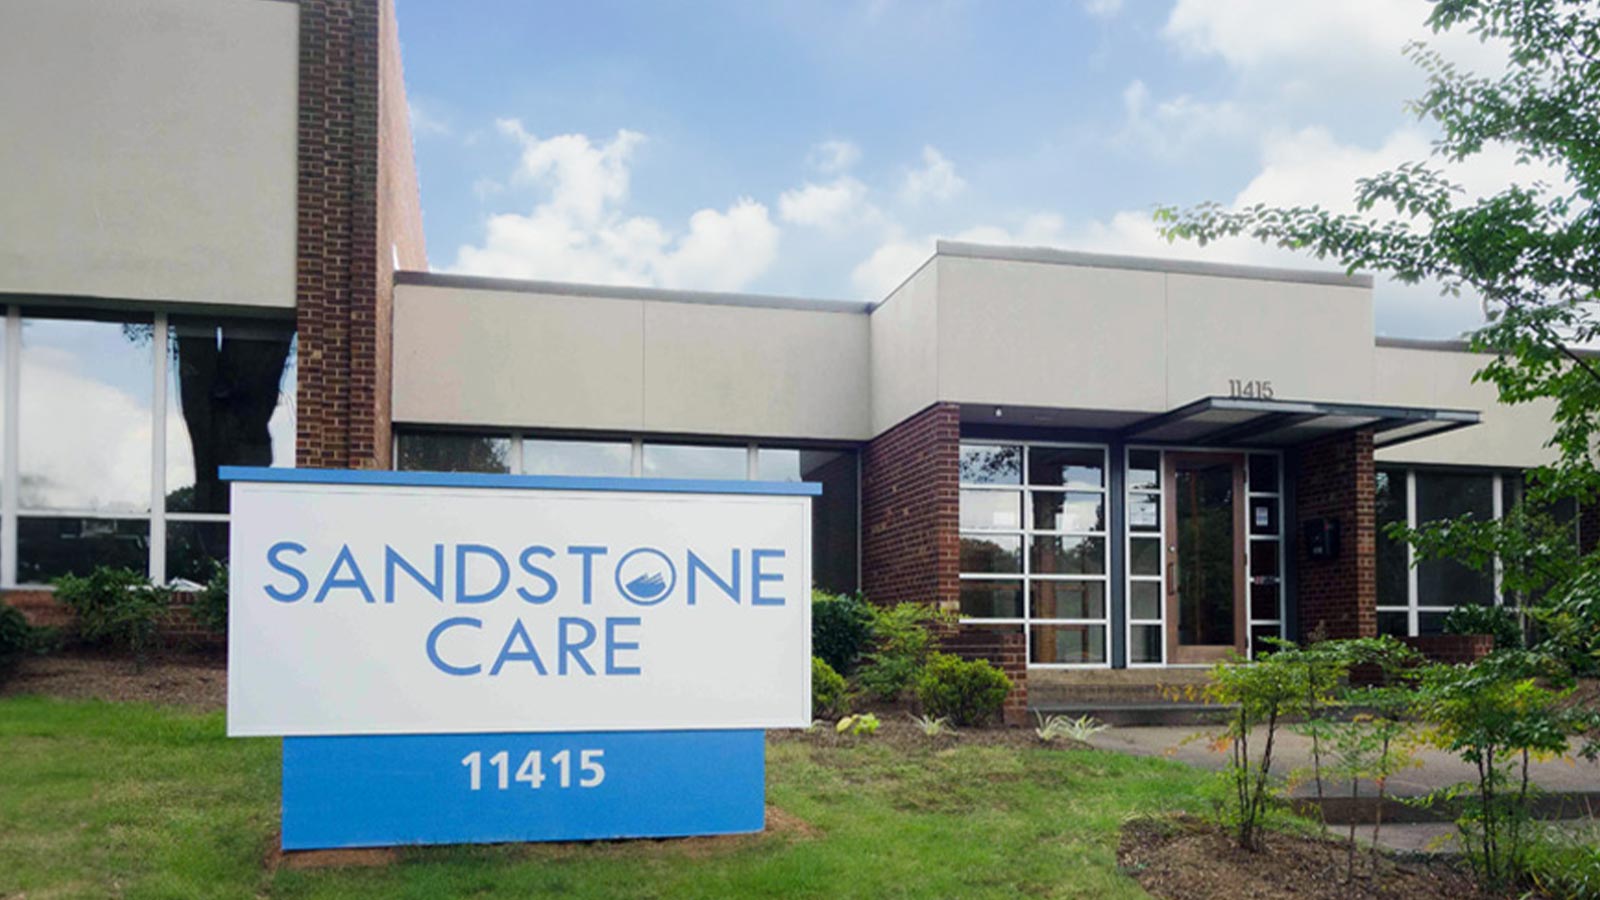 A two-story building with a mix of brick and beige facade features a prominent "Sandstone Care" sign at the entrance.